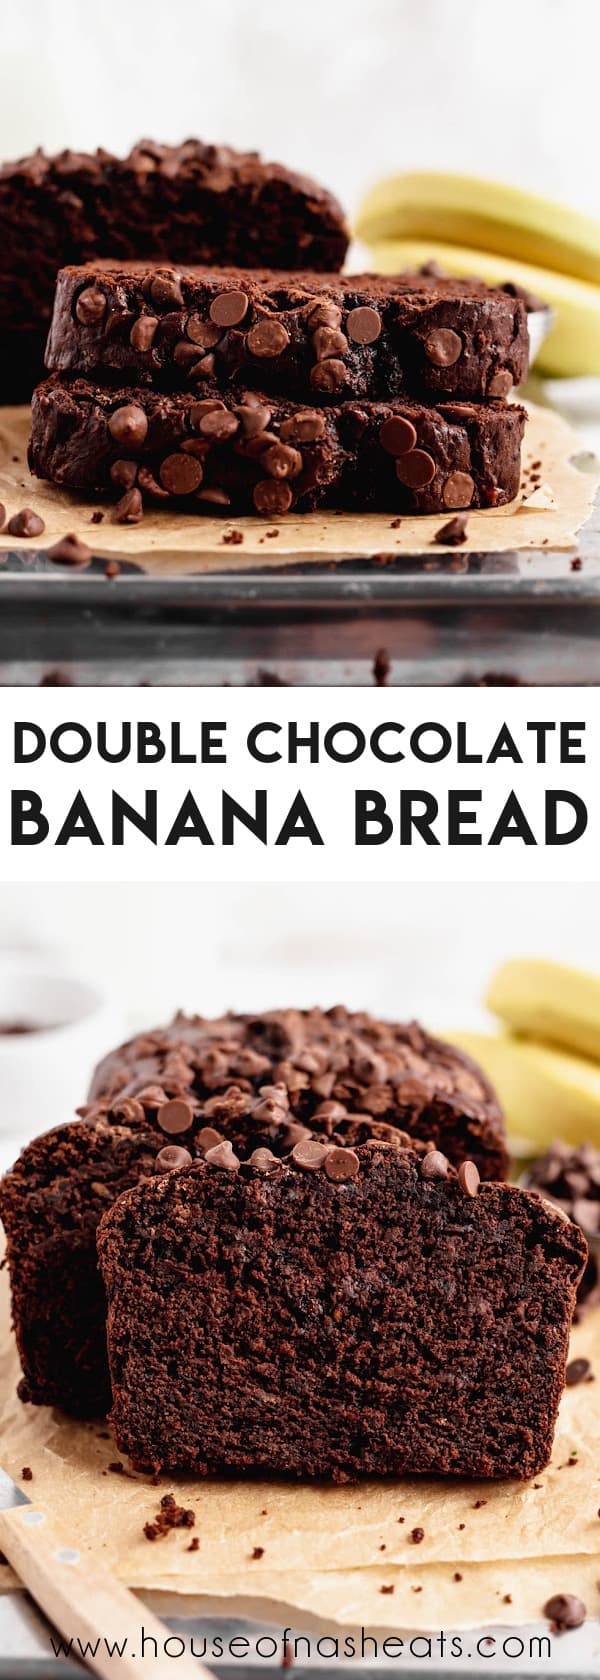 A collage of images of double chocolate banana bread with text overlay.